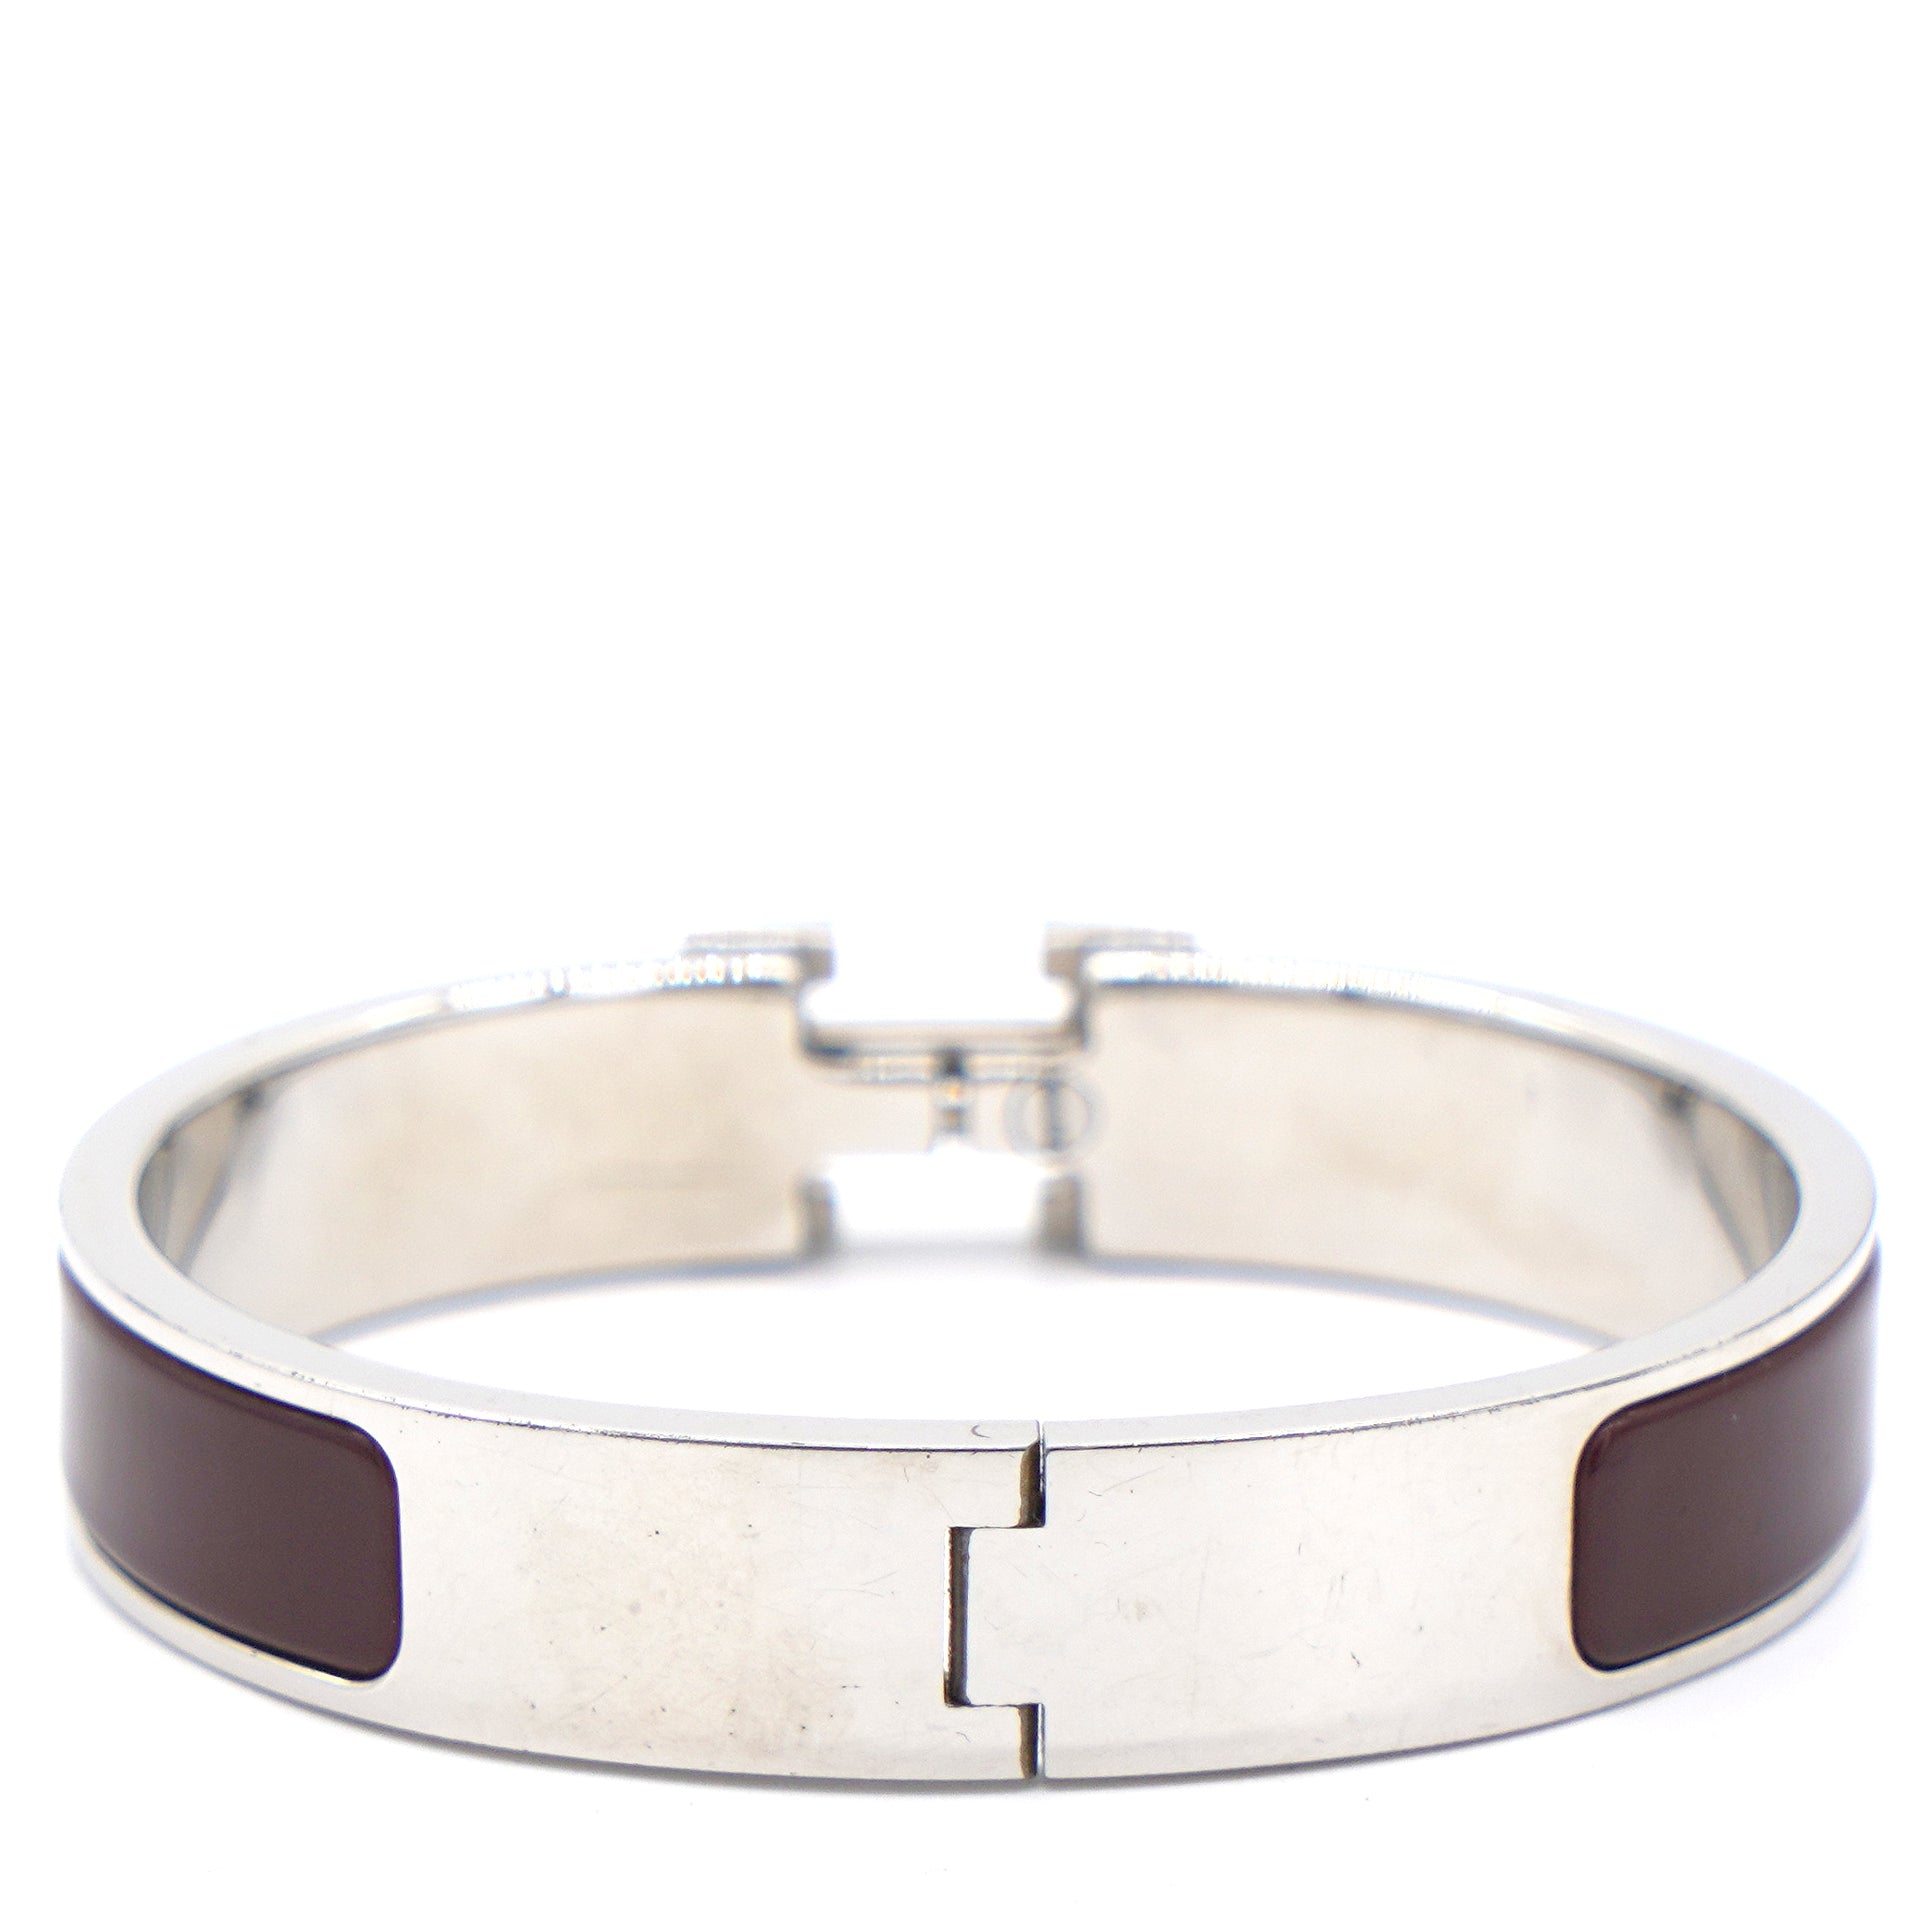 Hermes Narrow Clic H Bracelet (Cobalt Blue/Palladium Plated) - GM | Rent  Hermes jewelry for $55/month - Join Switch